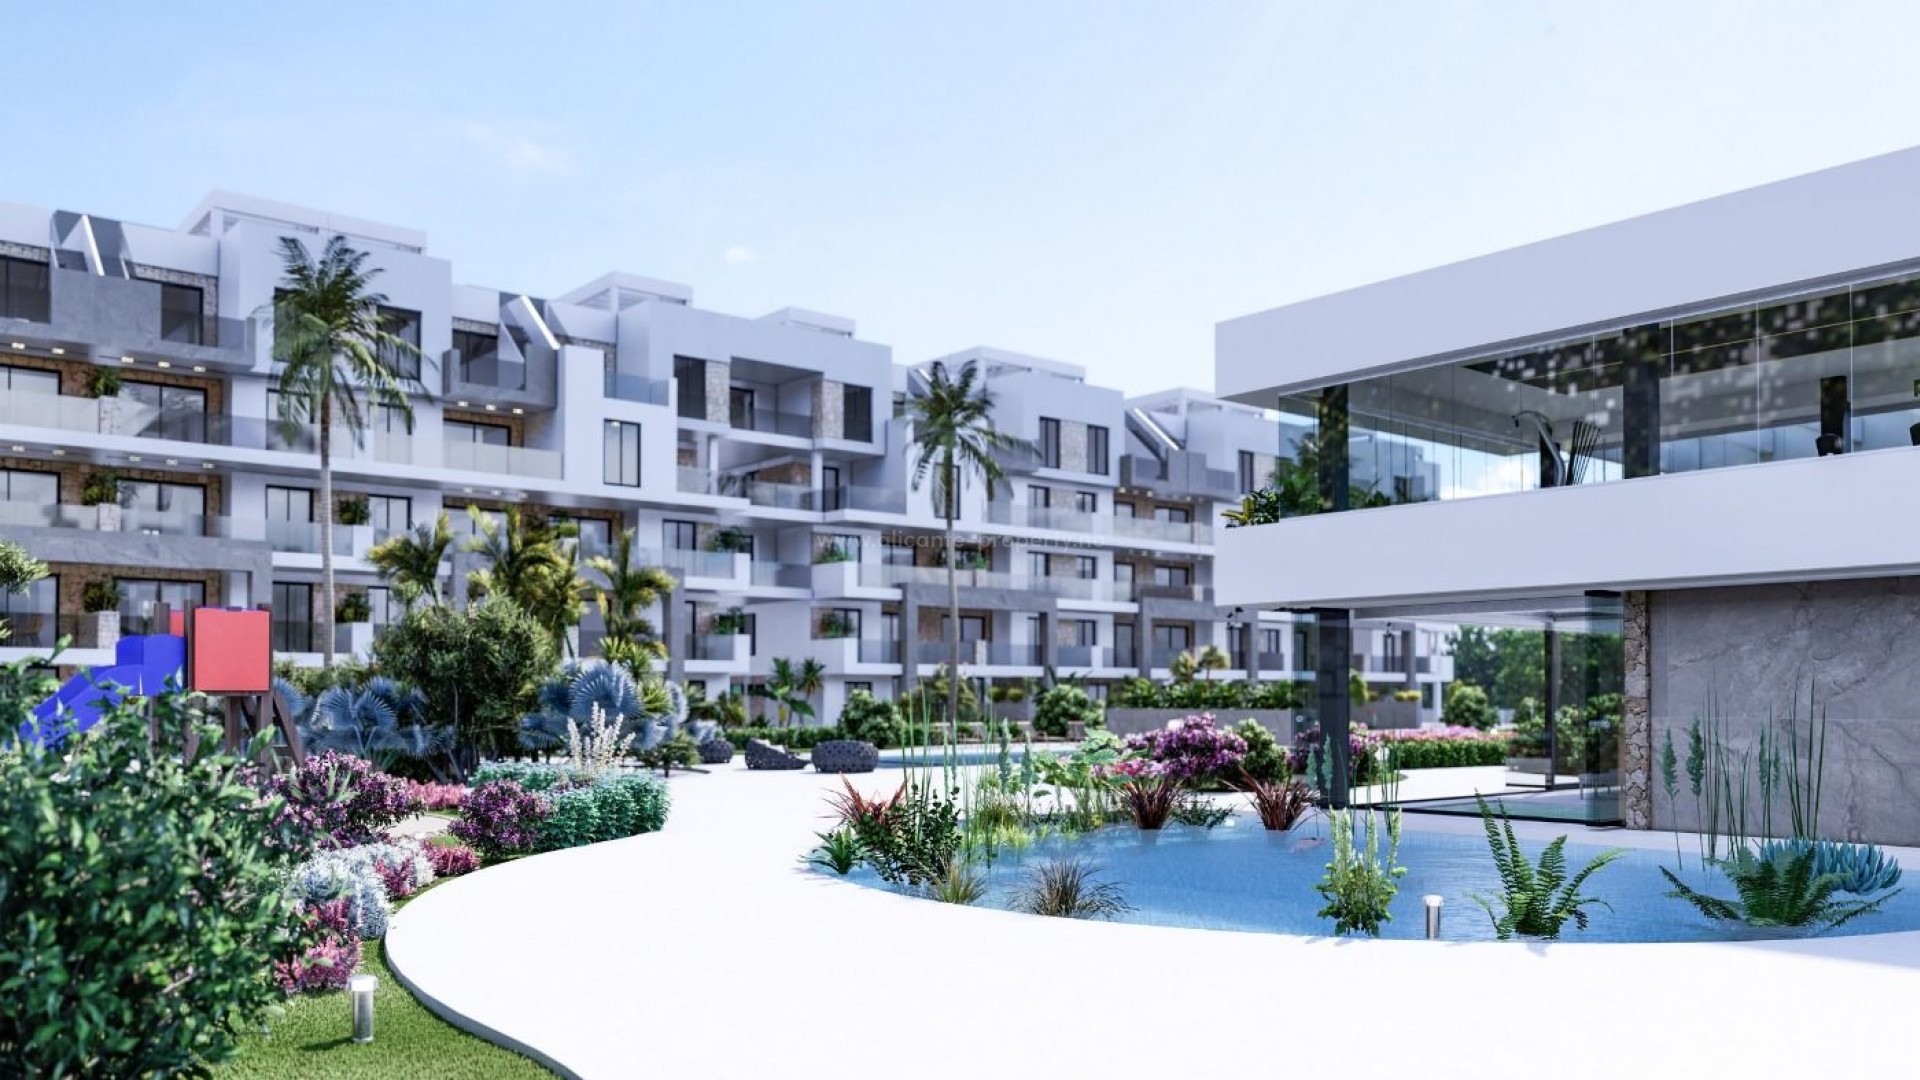 Apartments in residential complex in El Raso, Guardamar del Segura, 2/3 bedrooms, 2 bathrooms, terrace, nature and swimming pools, including gym/spa